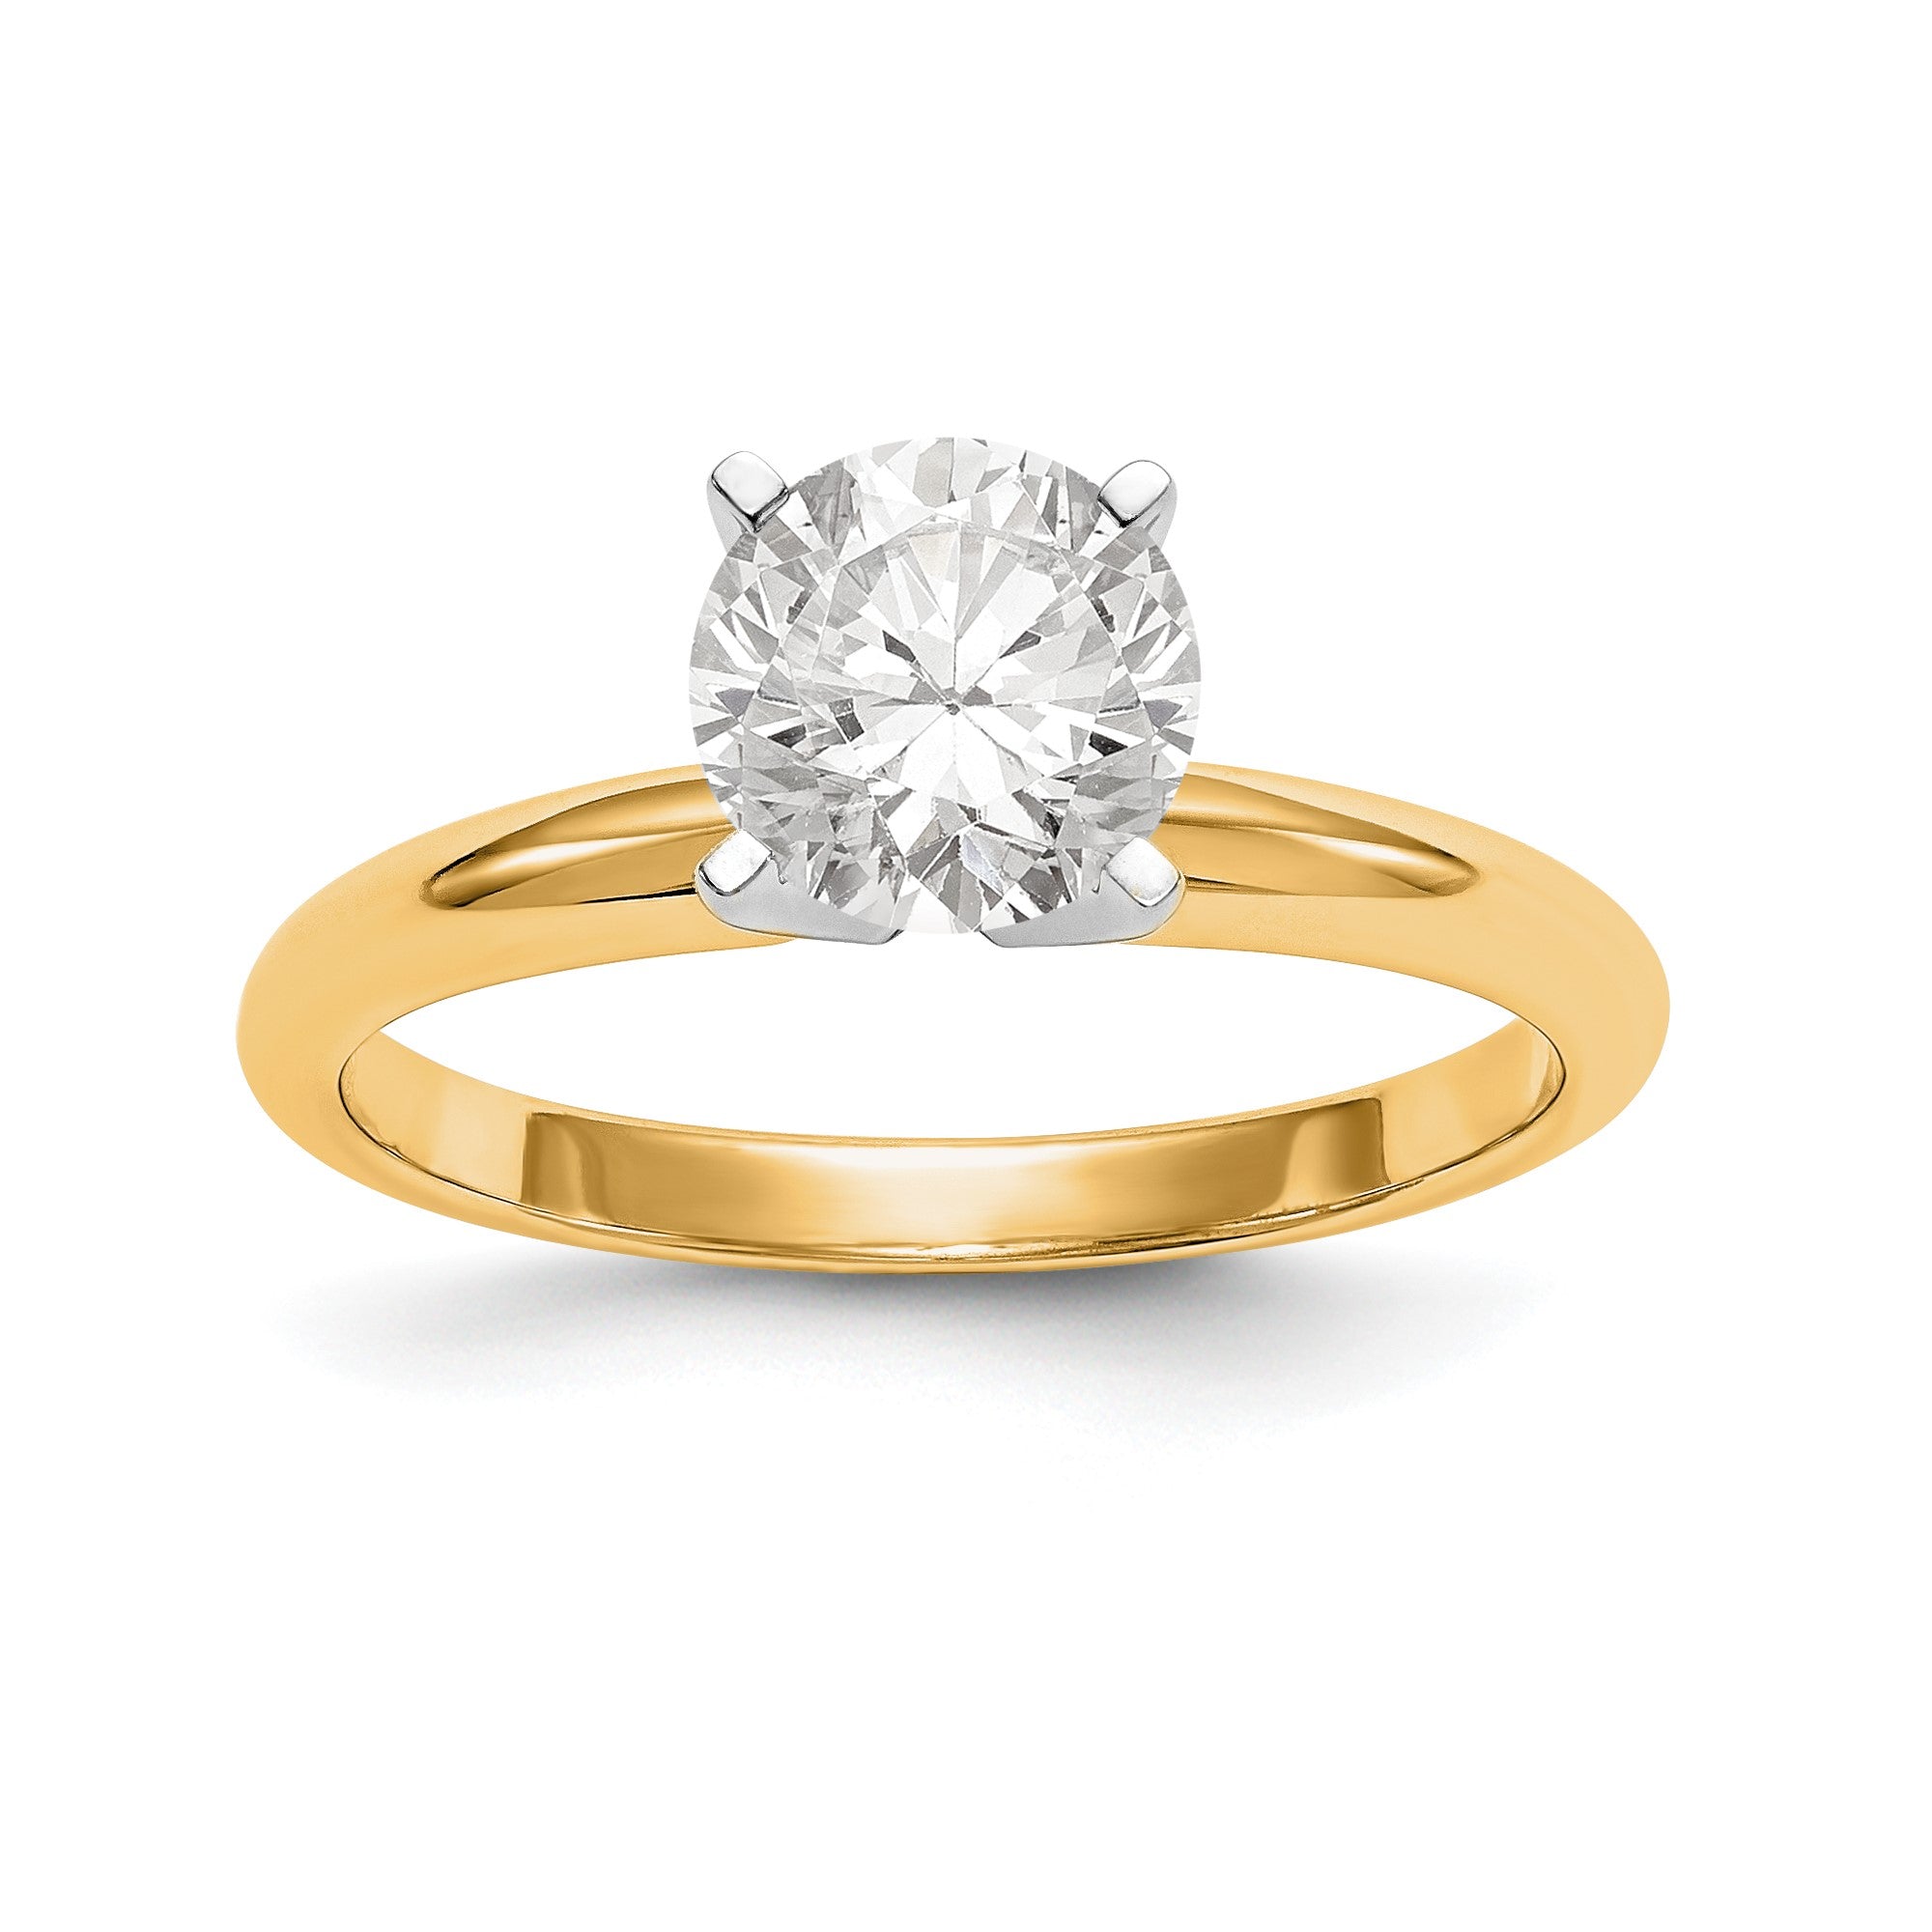 Image of ID 1 Natural Diamond Knife Edge Style Four Prong Solitaire Engagement Ring in 14K Yellow & White Gold